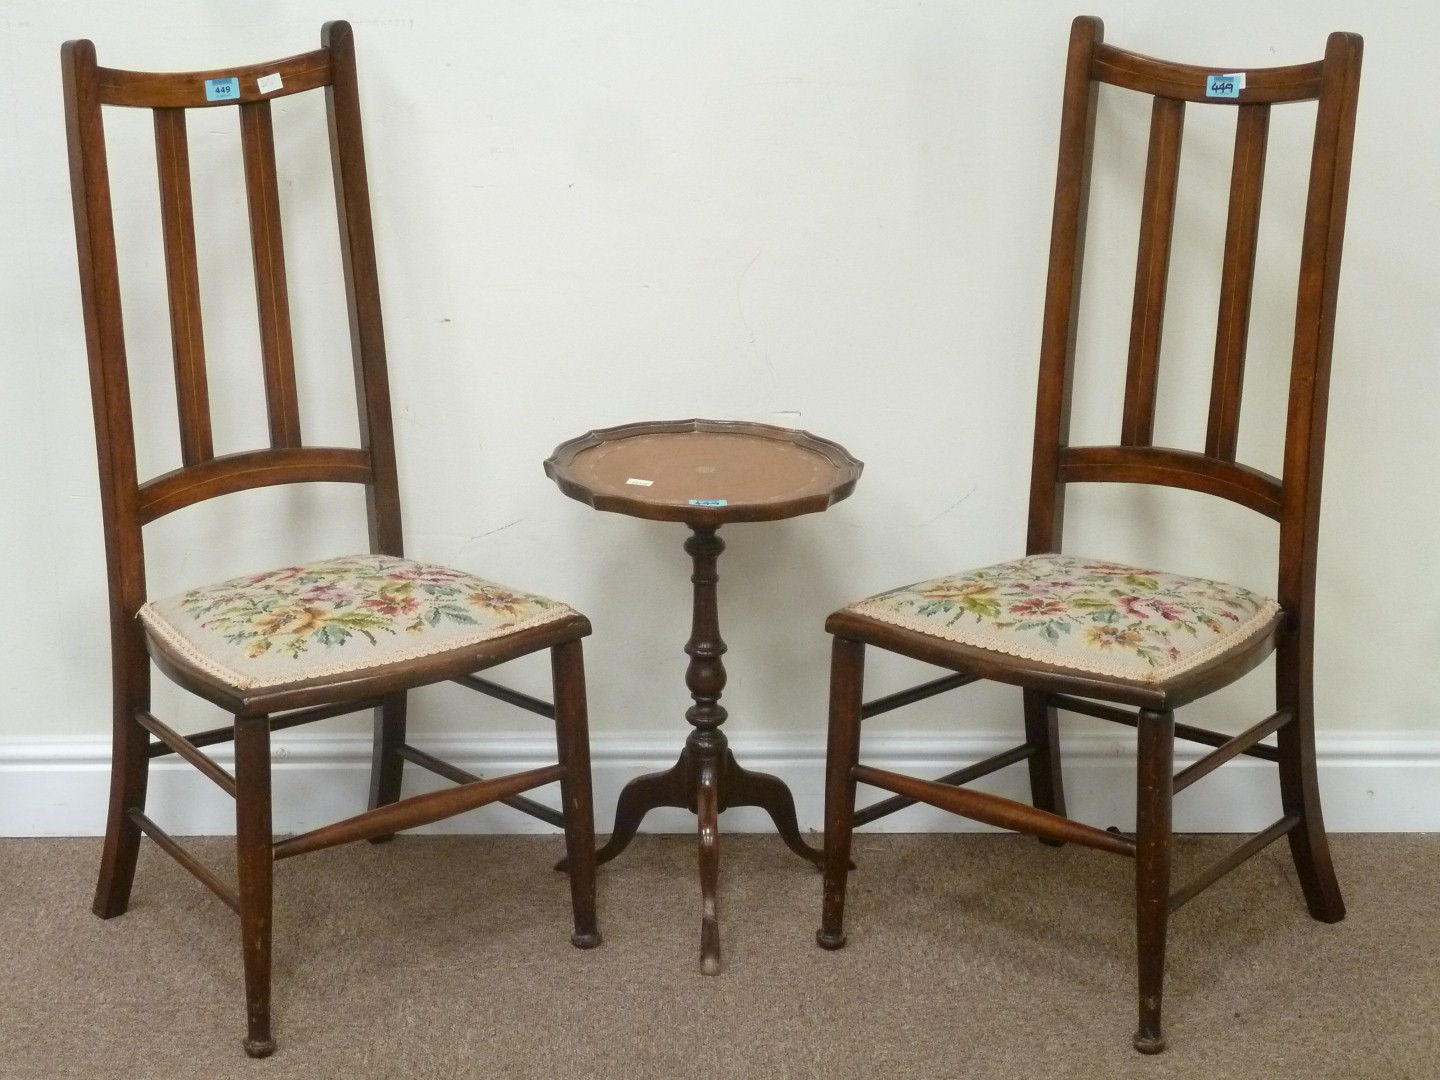 Pair Edwardian inlaid mahogany bedroom chairs with needlework seats and a mahogany wine table (3)